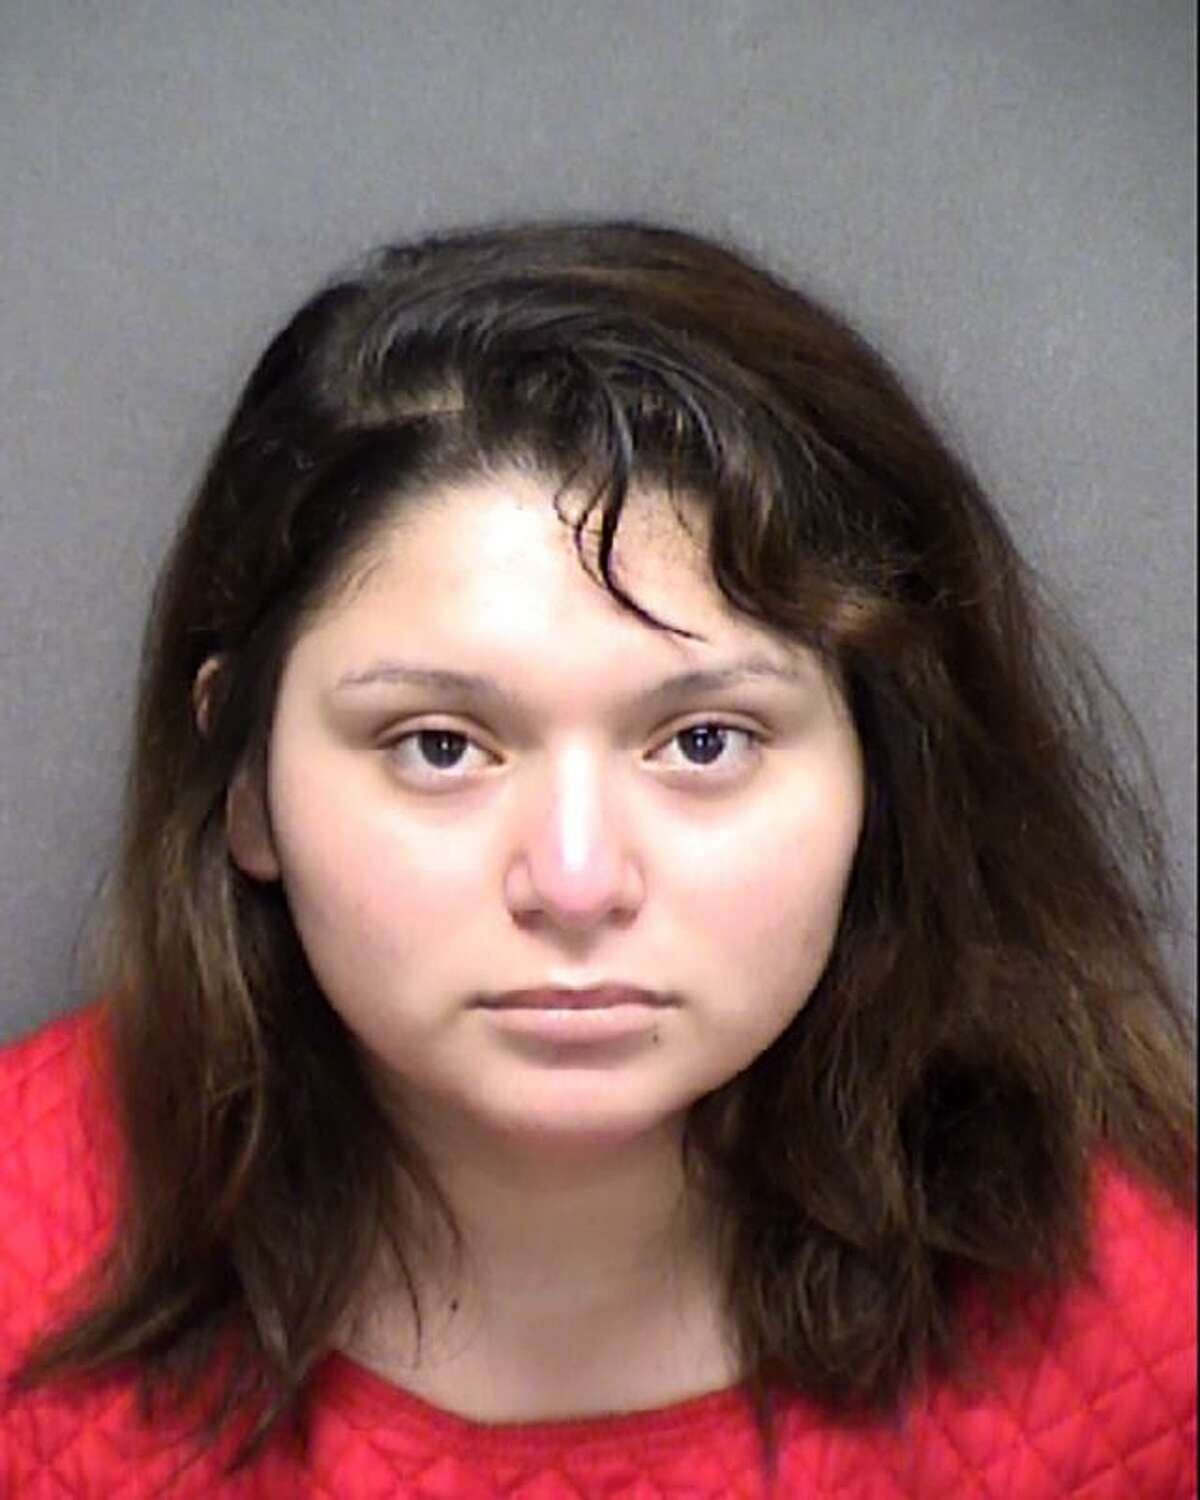 Authorities charged 20-year-old D'Lanny Reaneille Chairez with abandoning or endangering a child. She had been missing with her 18-month old son for more than two months early in 2021.